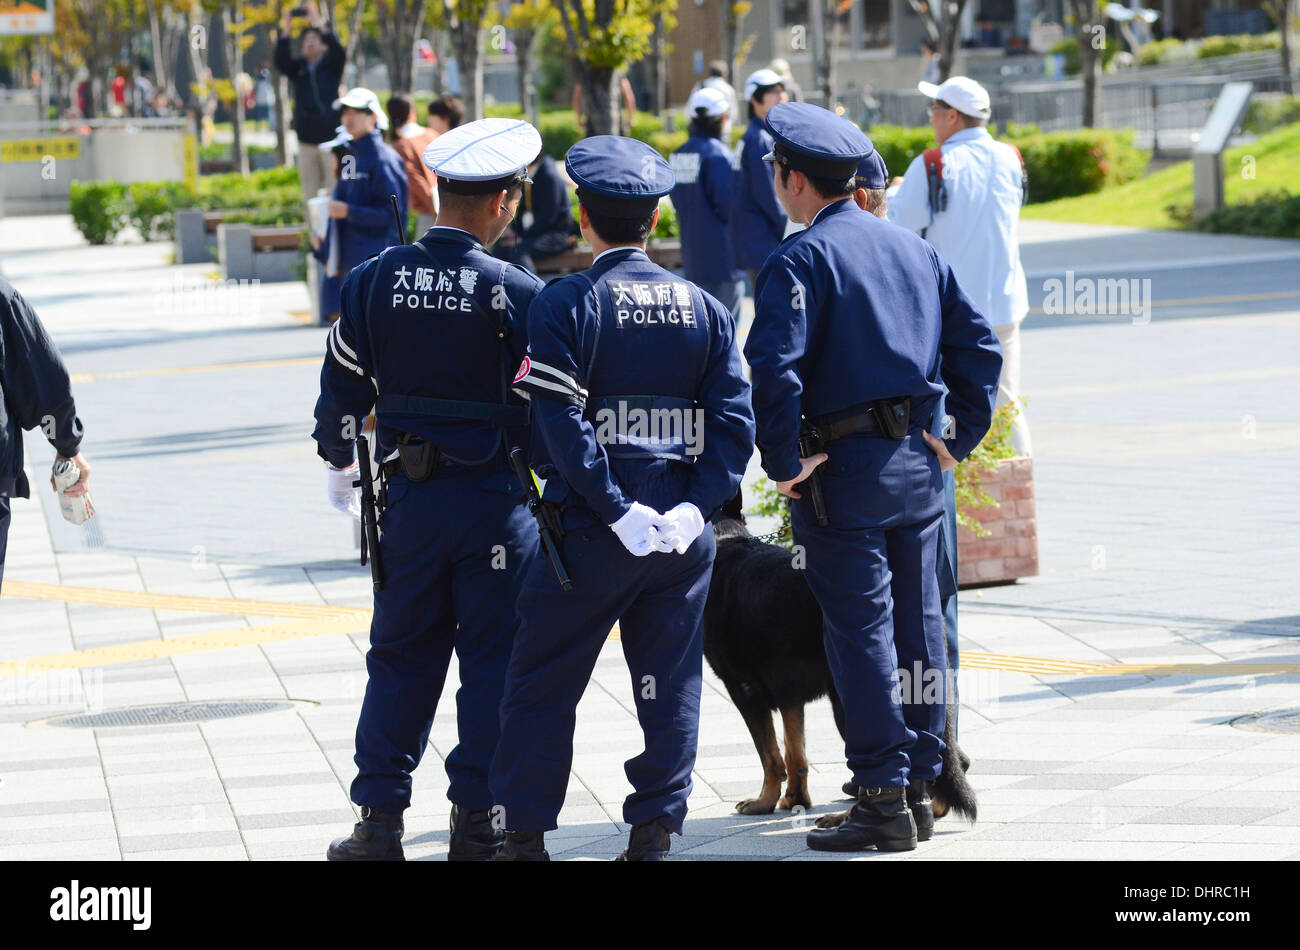 A group of police officers in Japan. Stock Photo